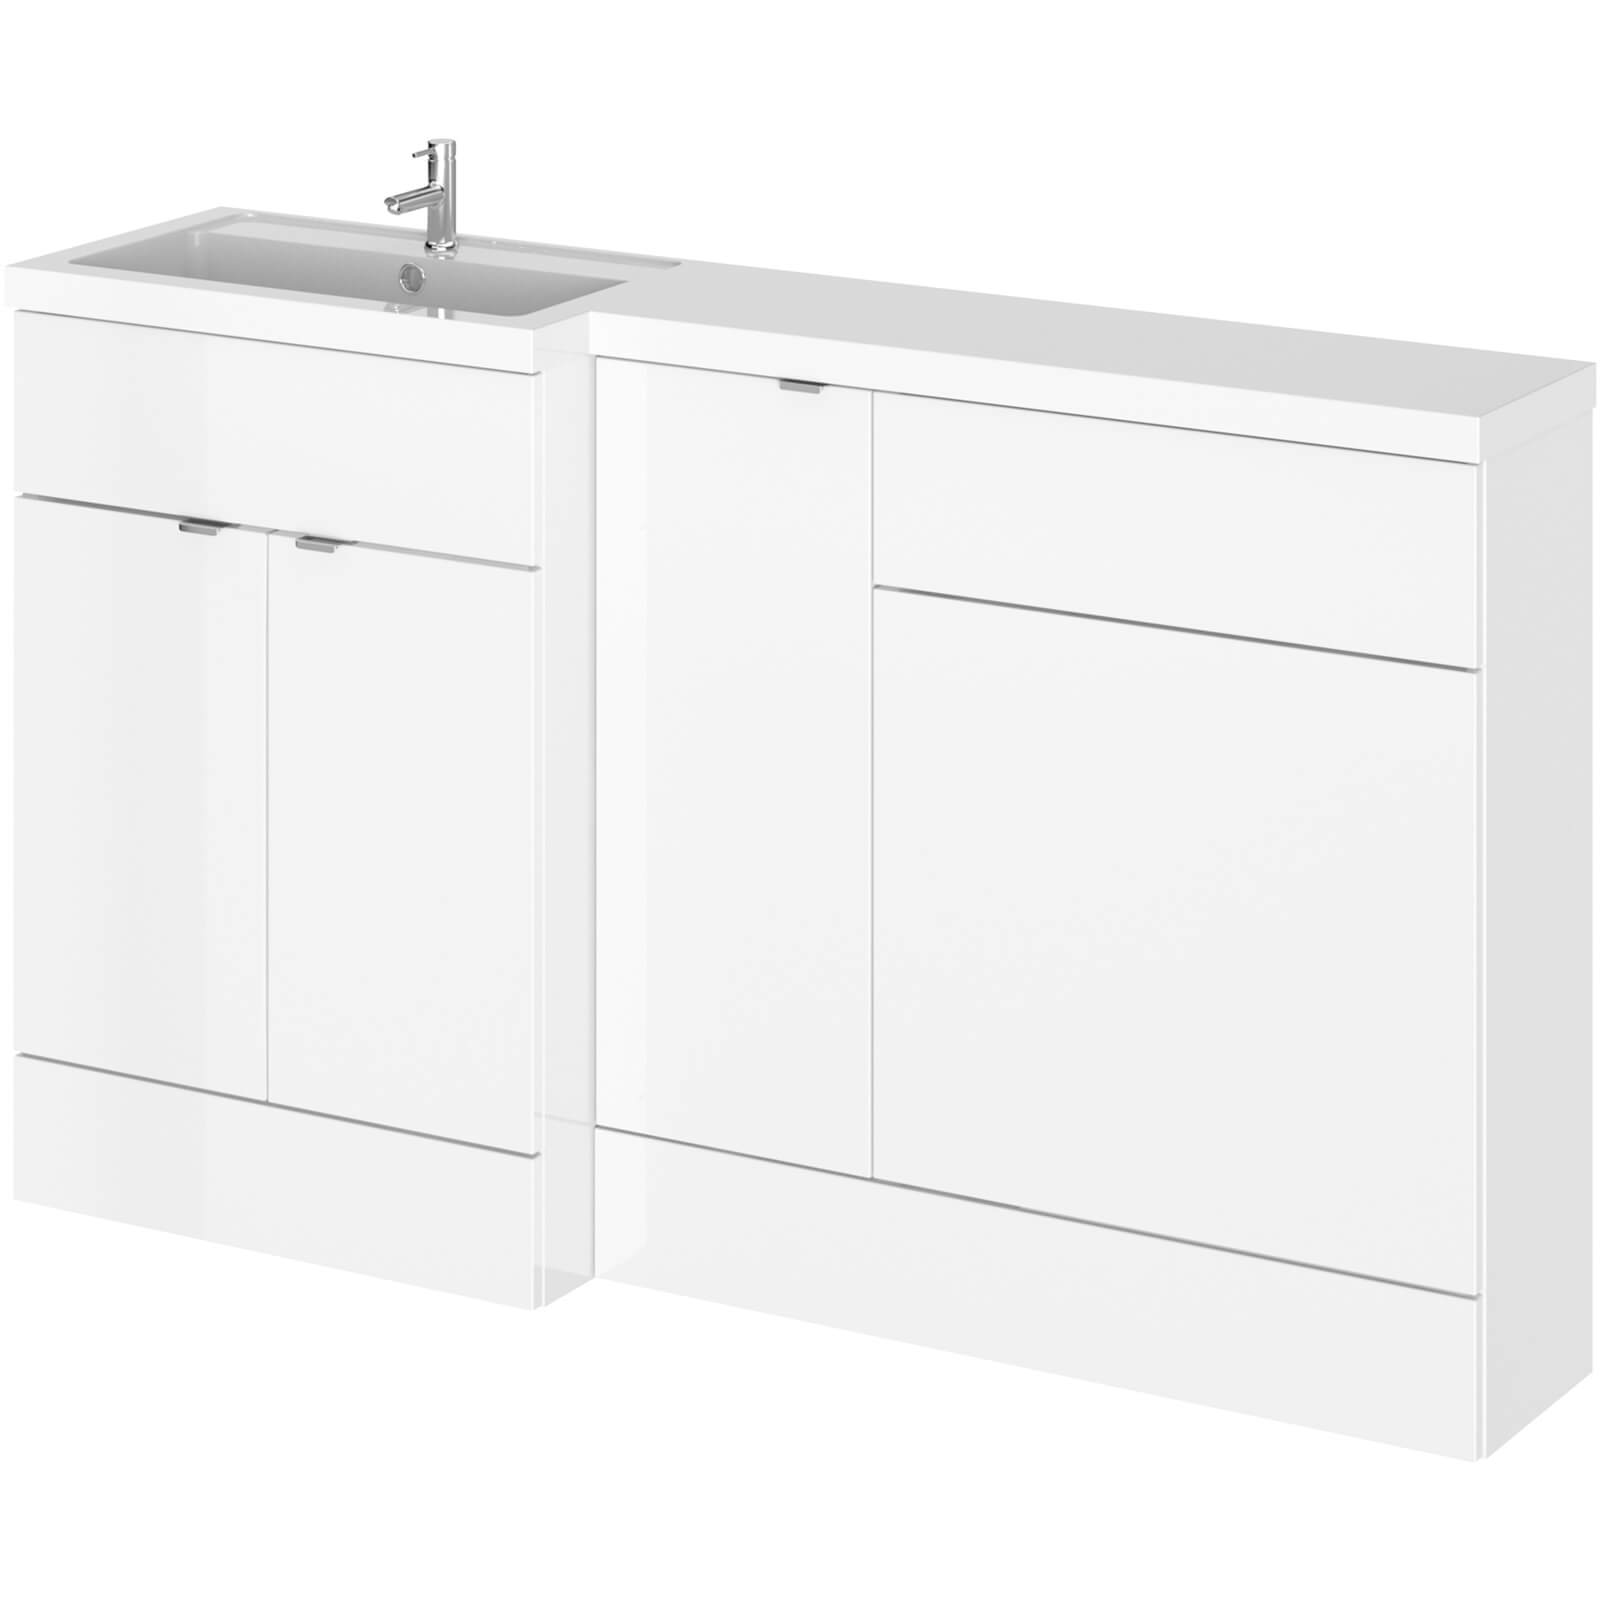 Balterley Dynamic 1500mm Left Hand WC Combination Unit - Gloss White